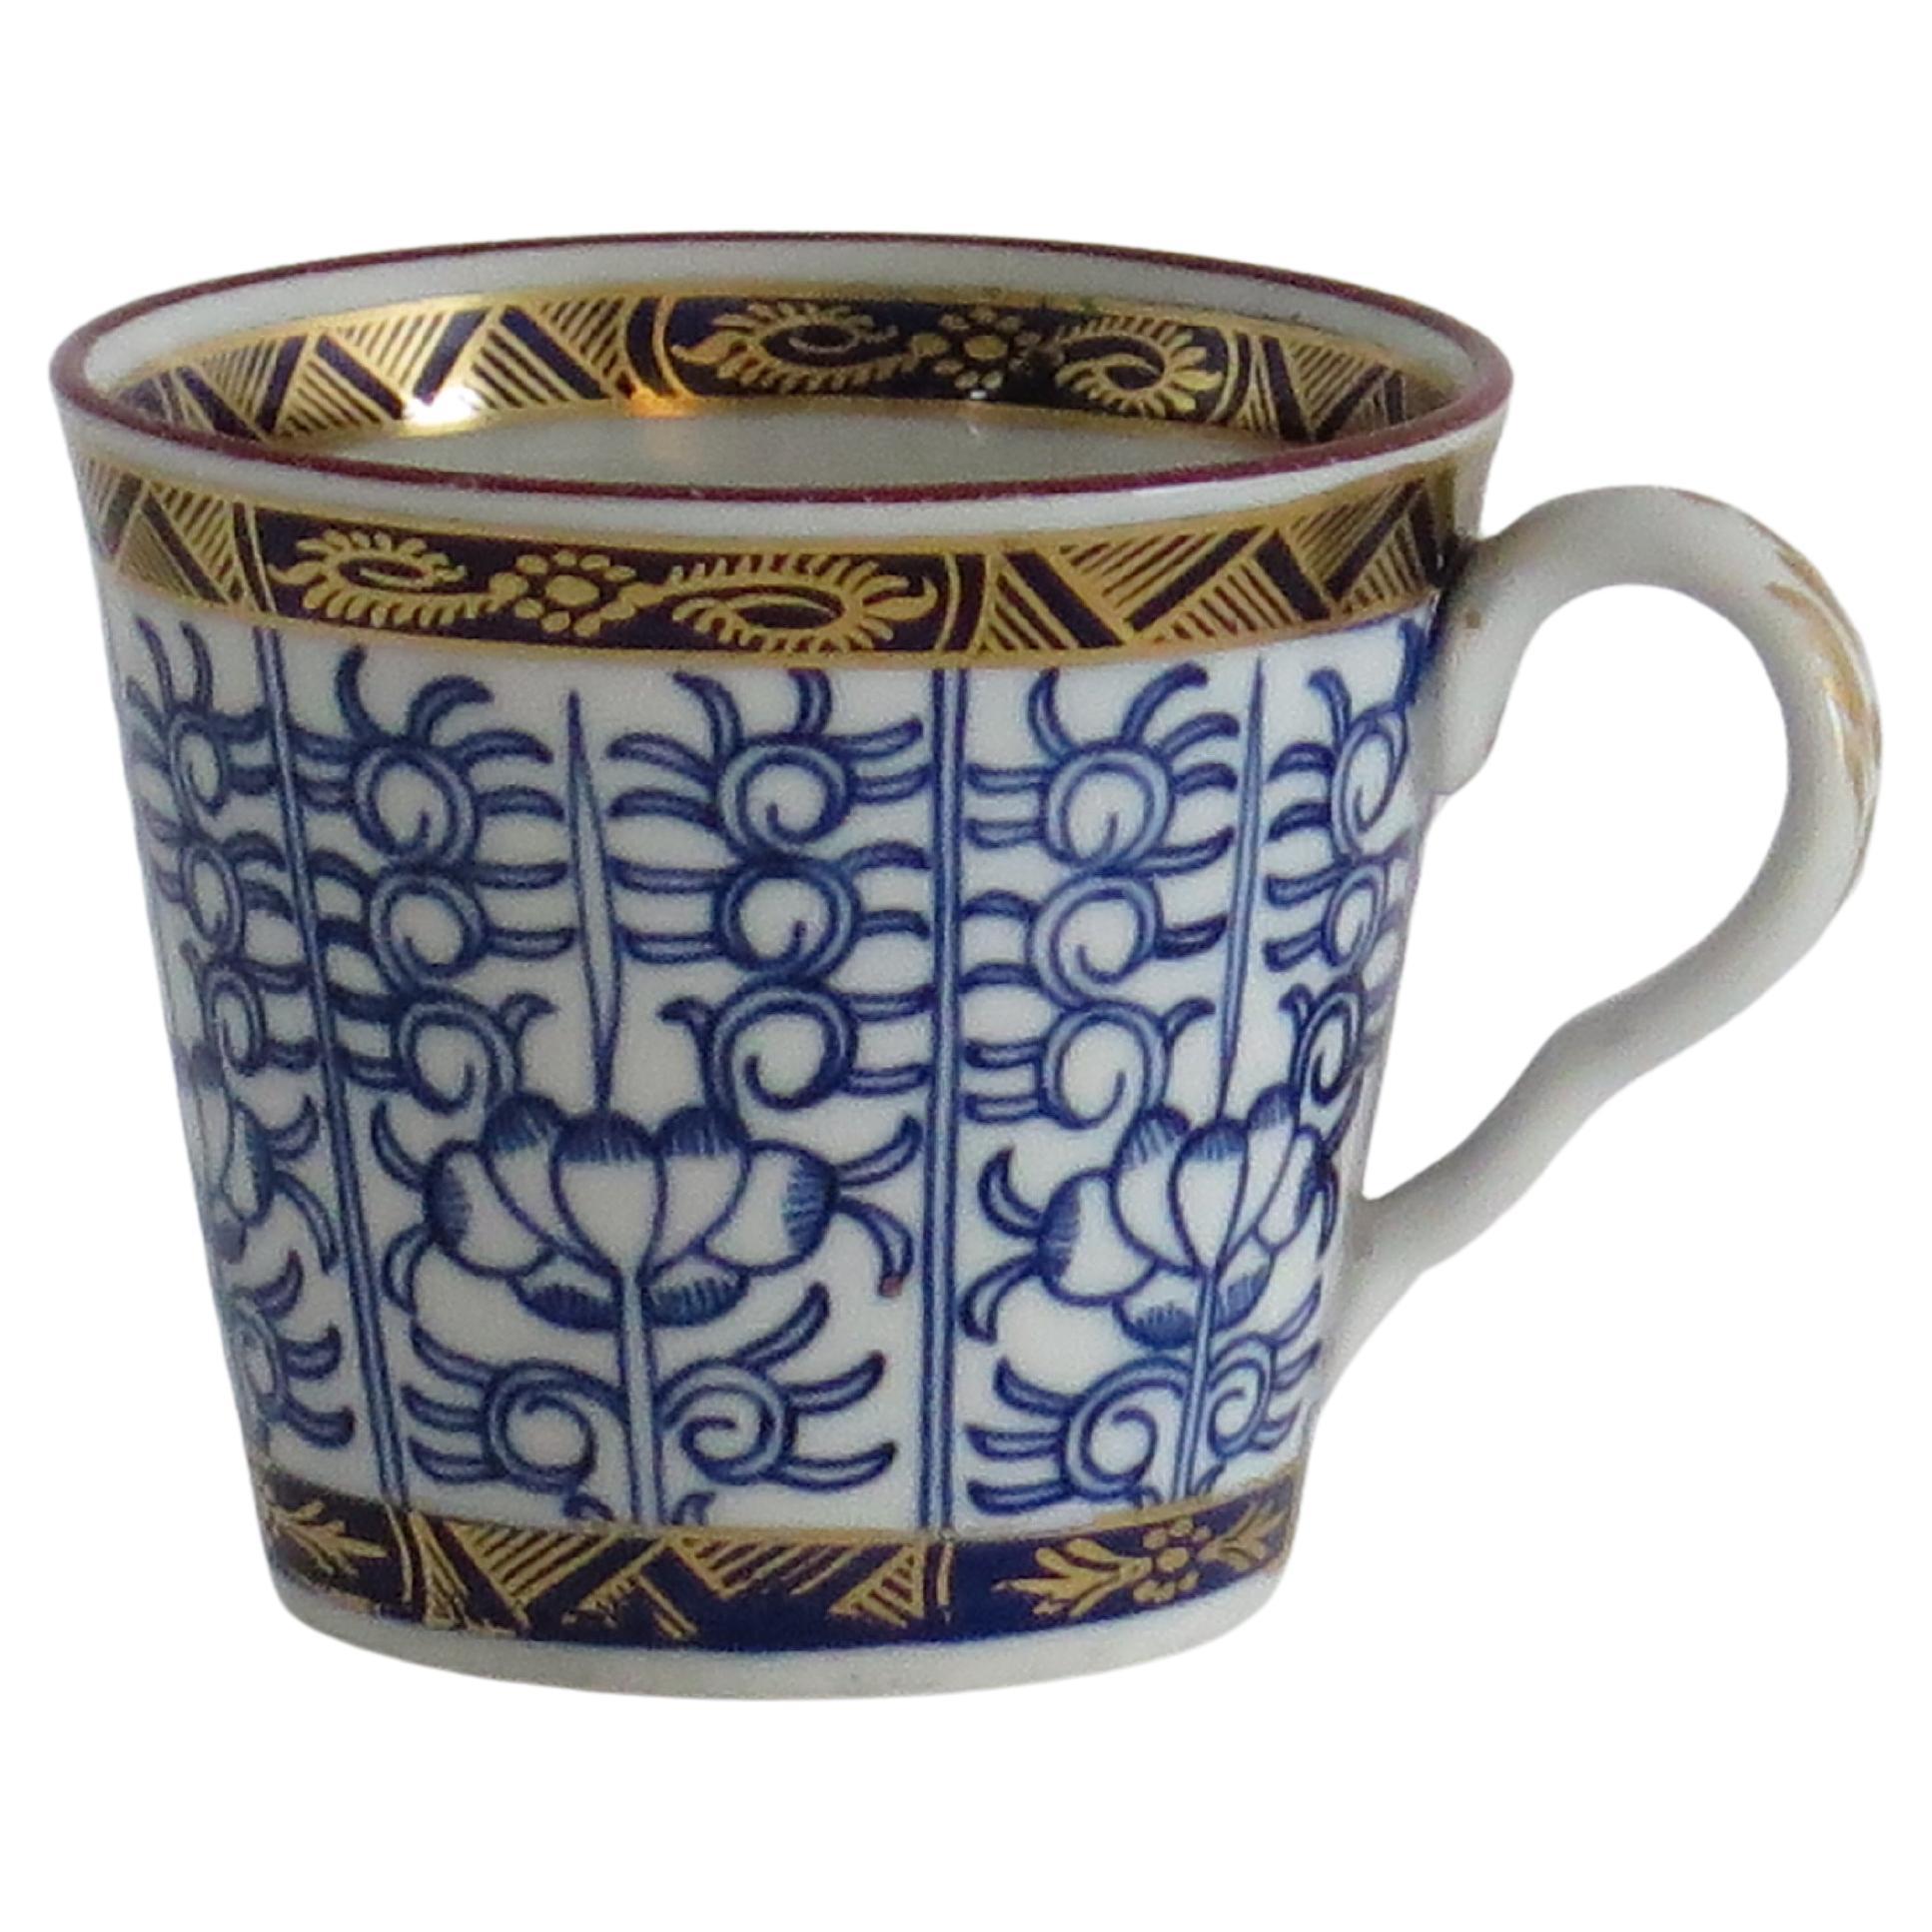 Worcester Barr Period Porcelain Coffee Cup in Royal Lily pattern, circa 1800